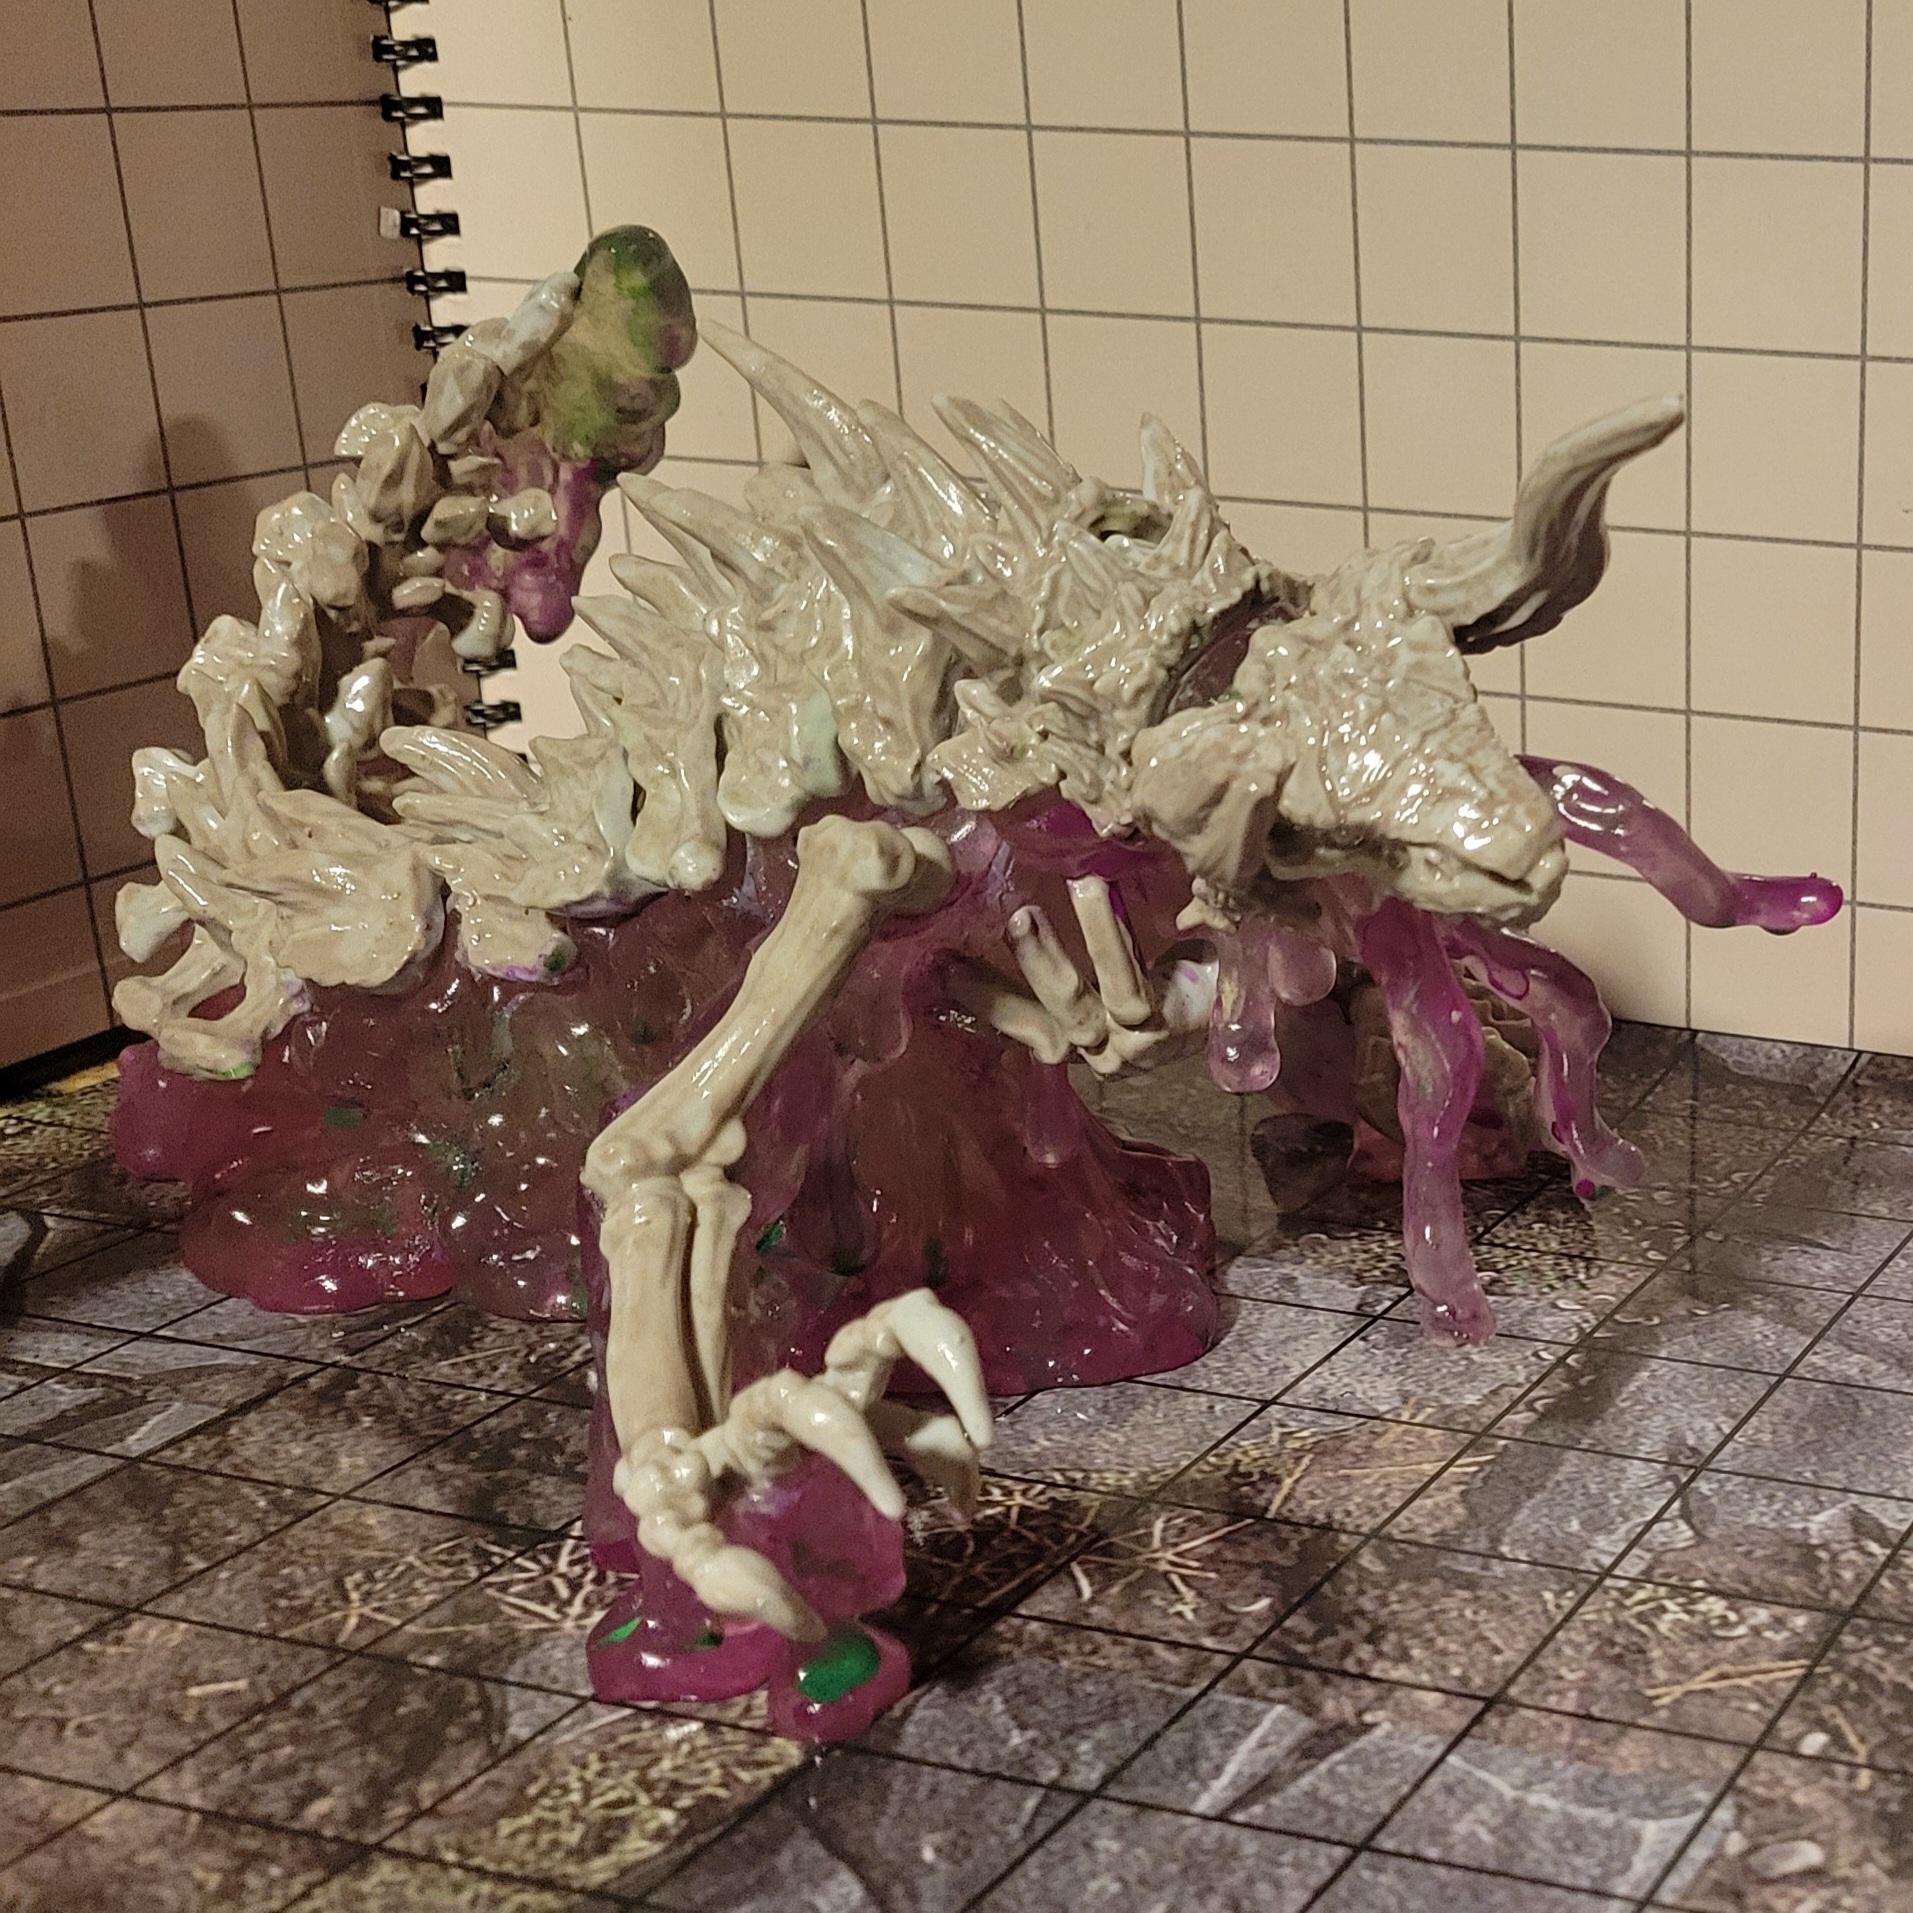 The Gelatinous Tarrasque - It took a week to print and paint but my brother and I love it - 3d model